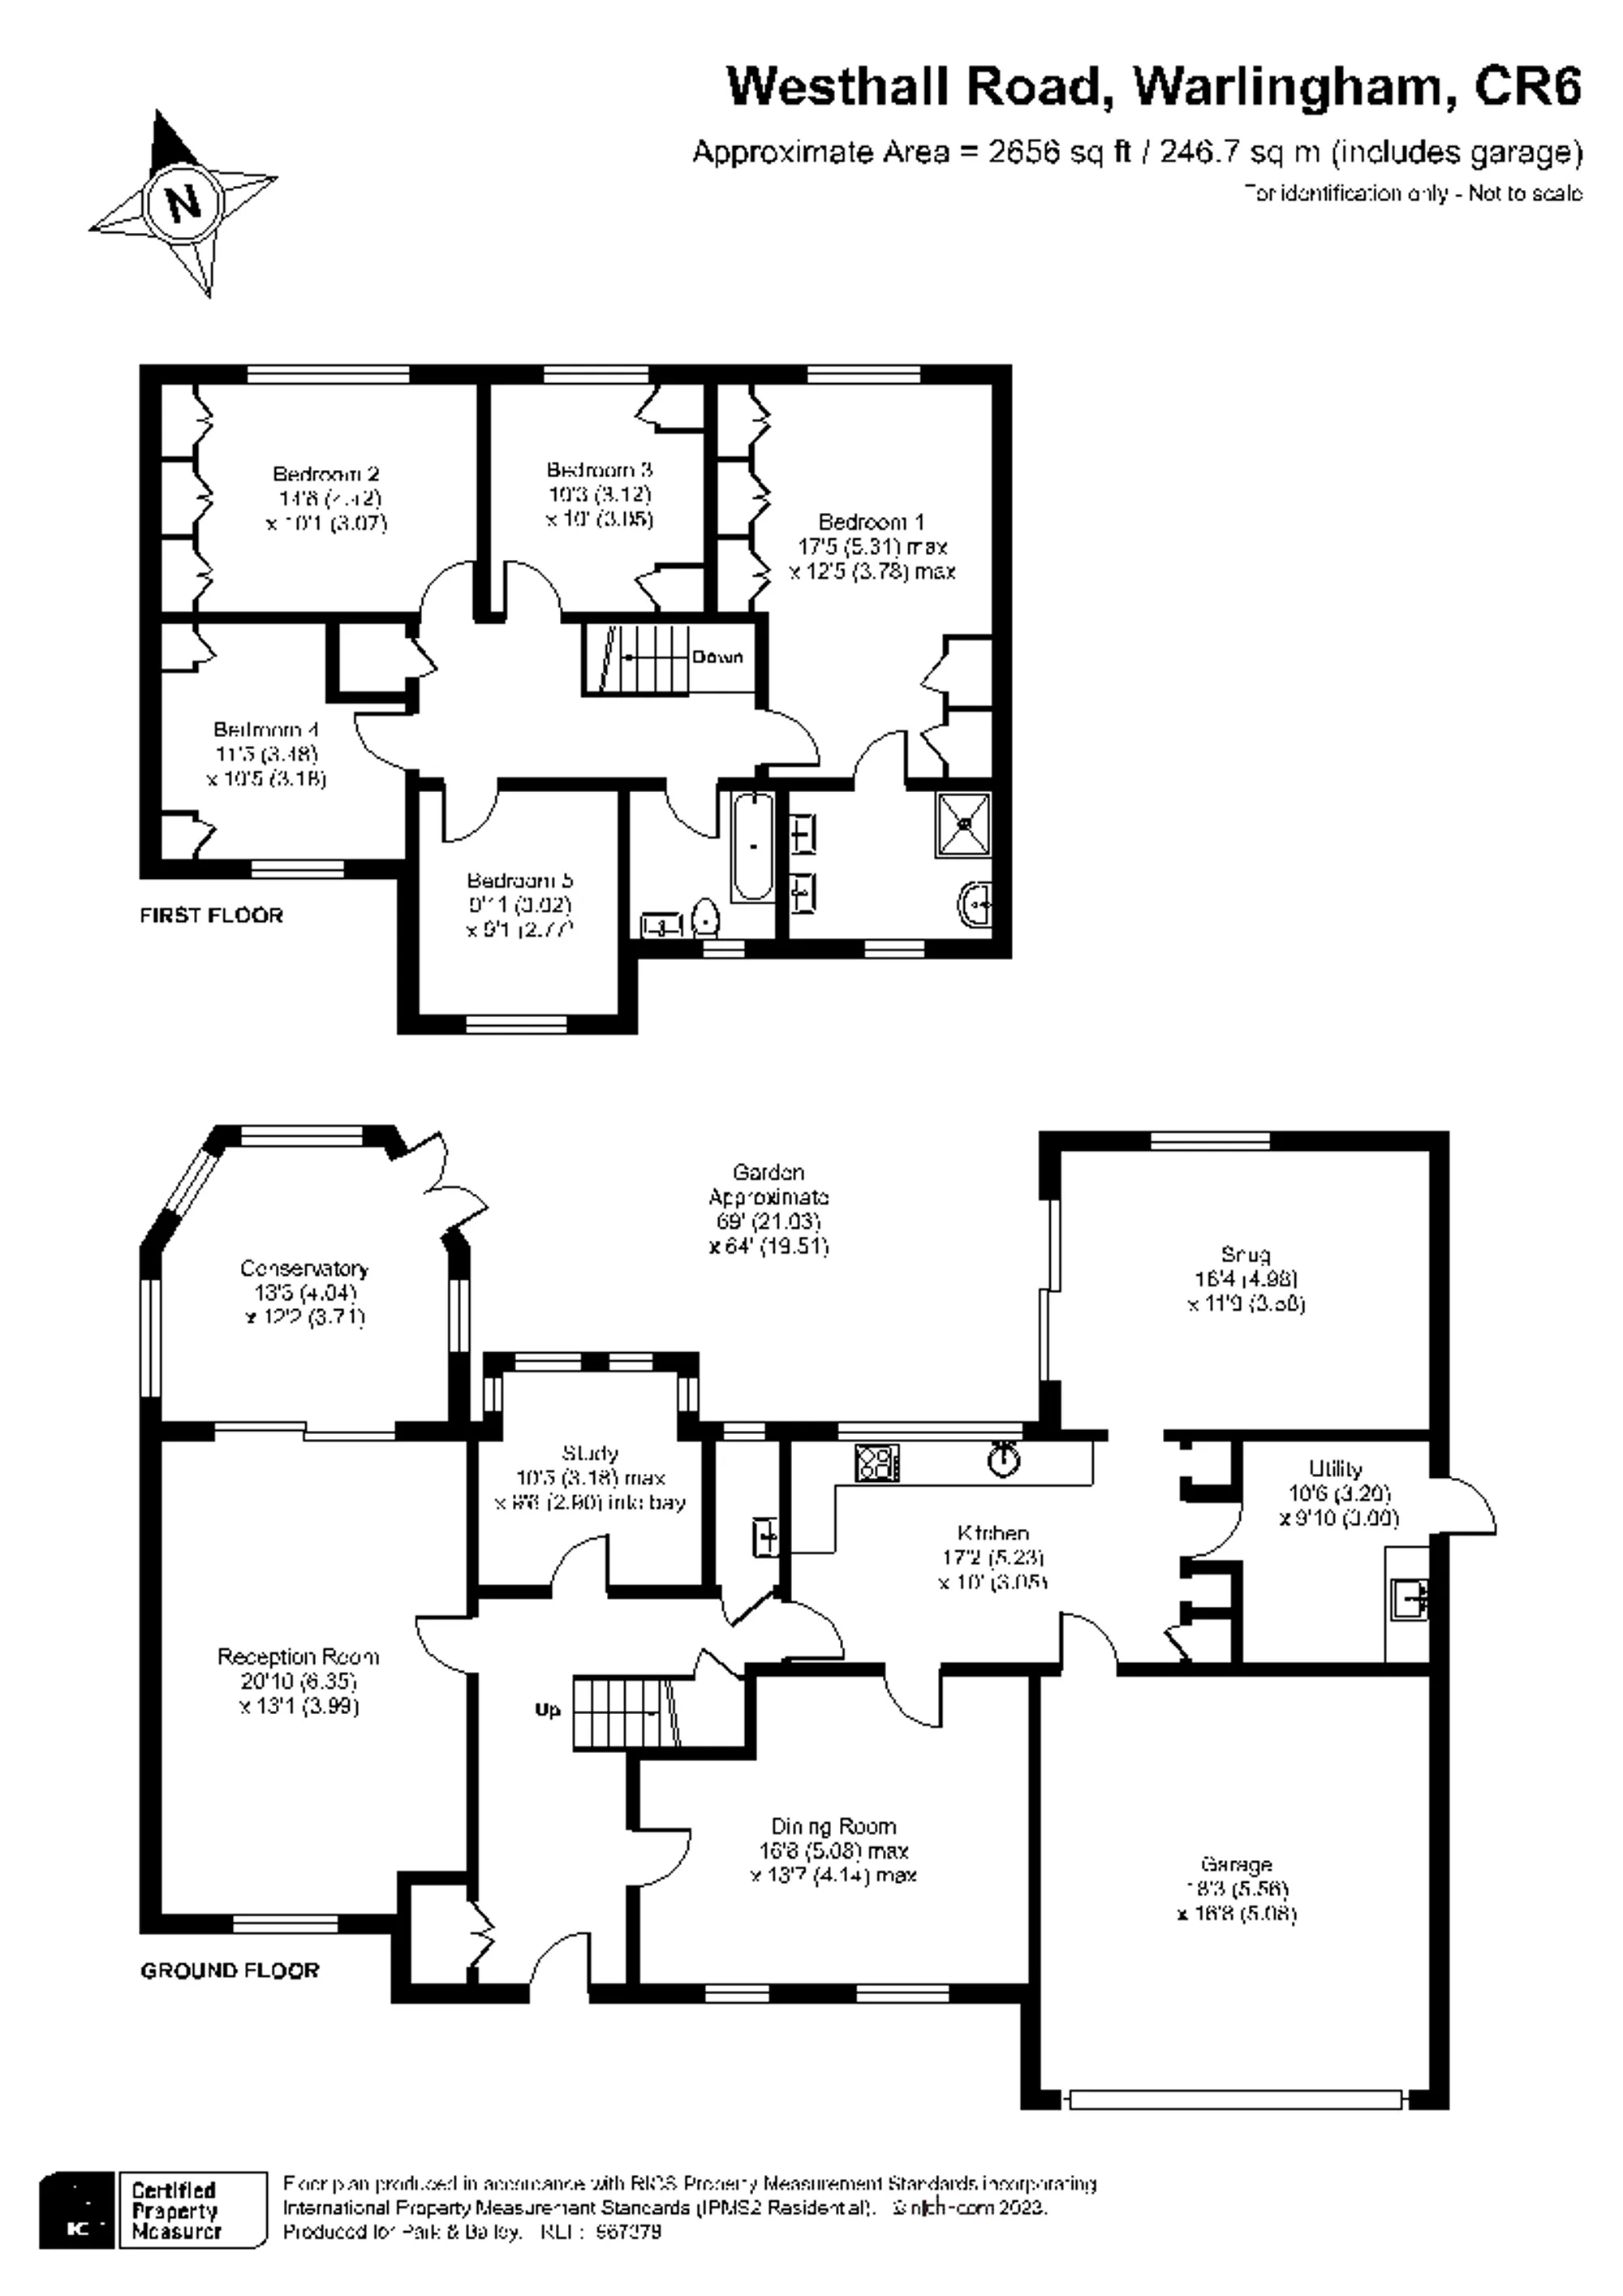 5 bed detached house for sale in Westhall Road, Warlingham - Property floorplan